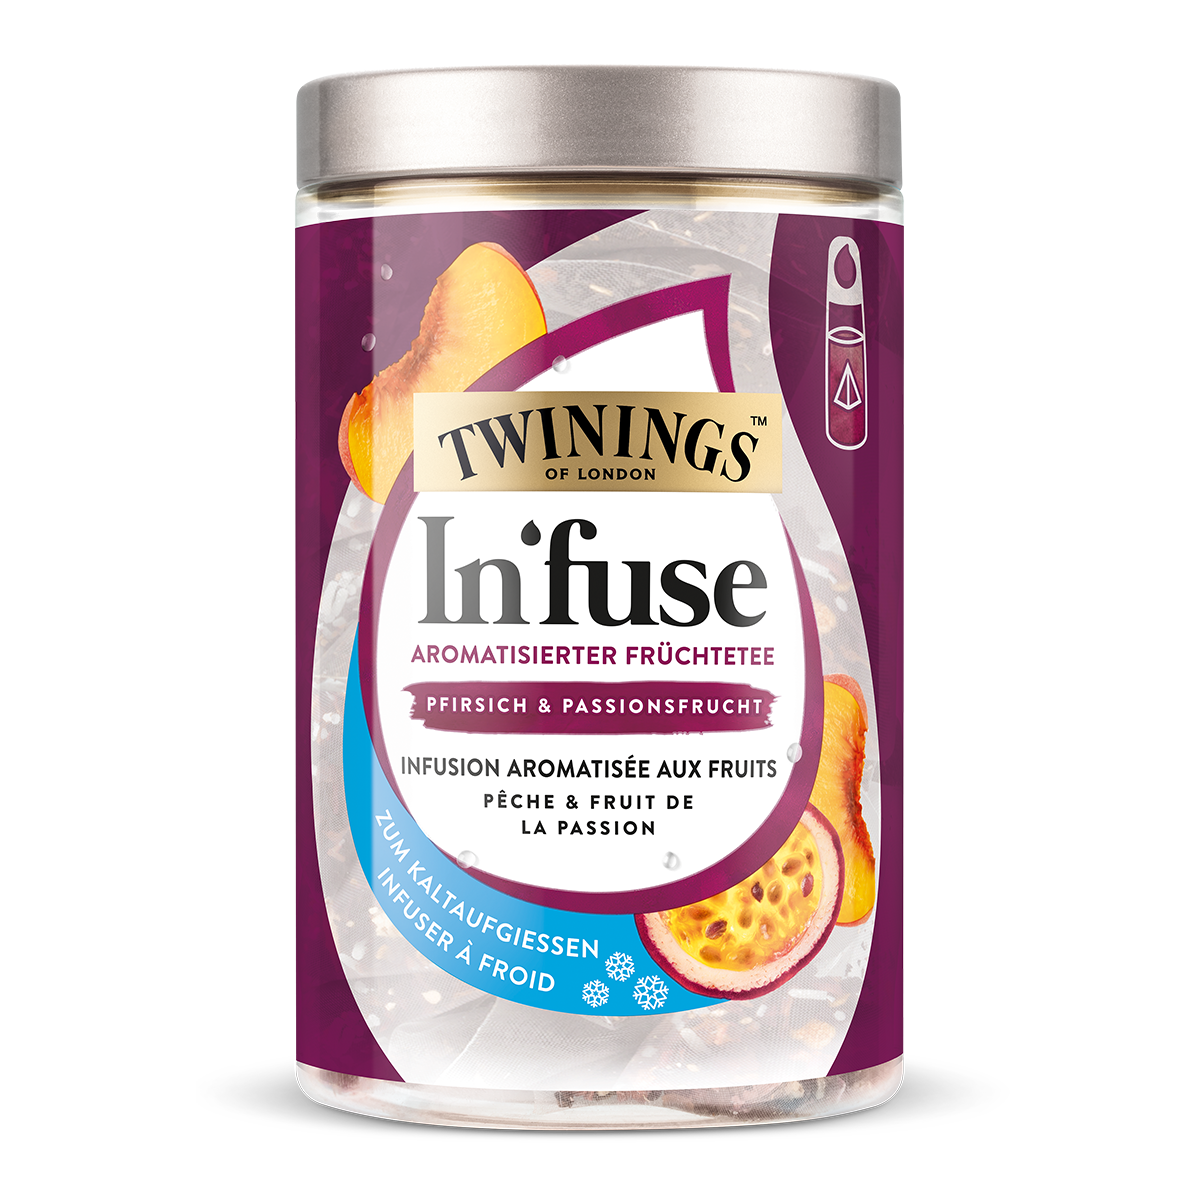 Twinings In'fuse Pfirsich und Passionsfrucht